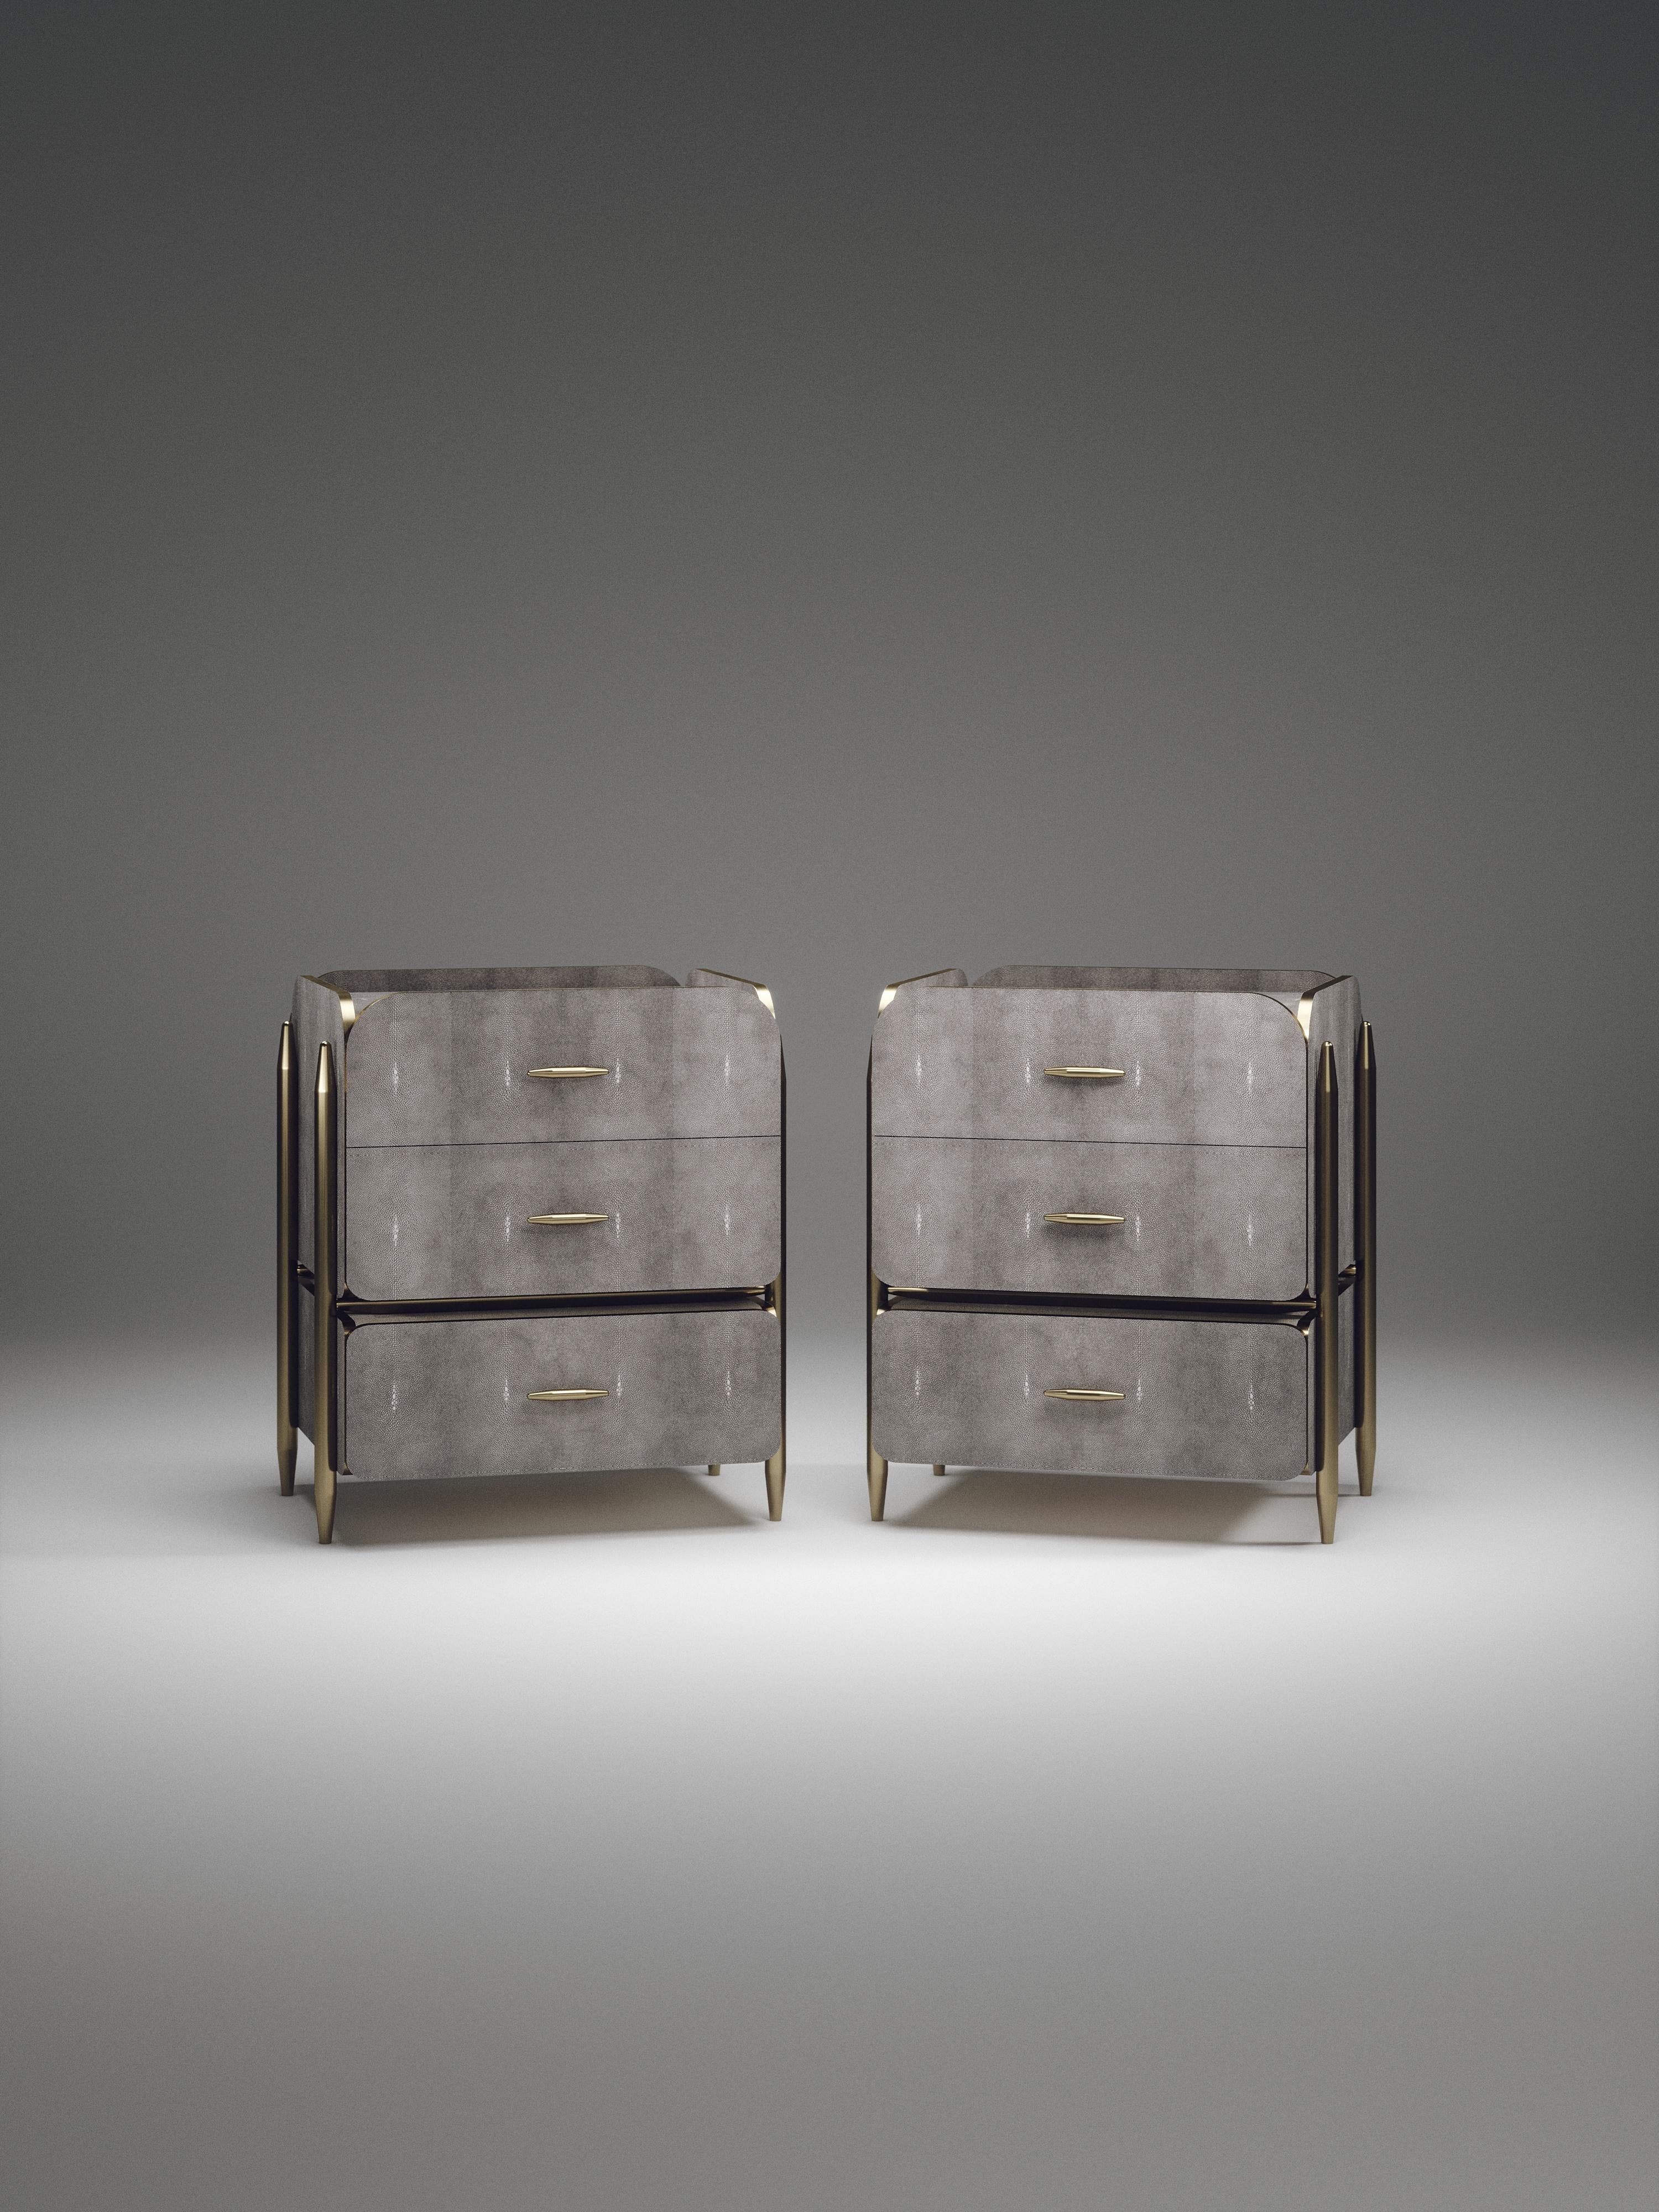 The Pair of Dandy Square Bedside Tables by Kifu Paris are elegant and luxurious home accents, inlaid in light grey shagreen with bronze-patina brass details. This piece includes 3 drawers total and the interiors are inlaid in gemelina wood veneer.